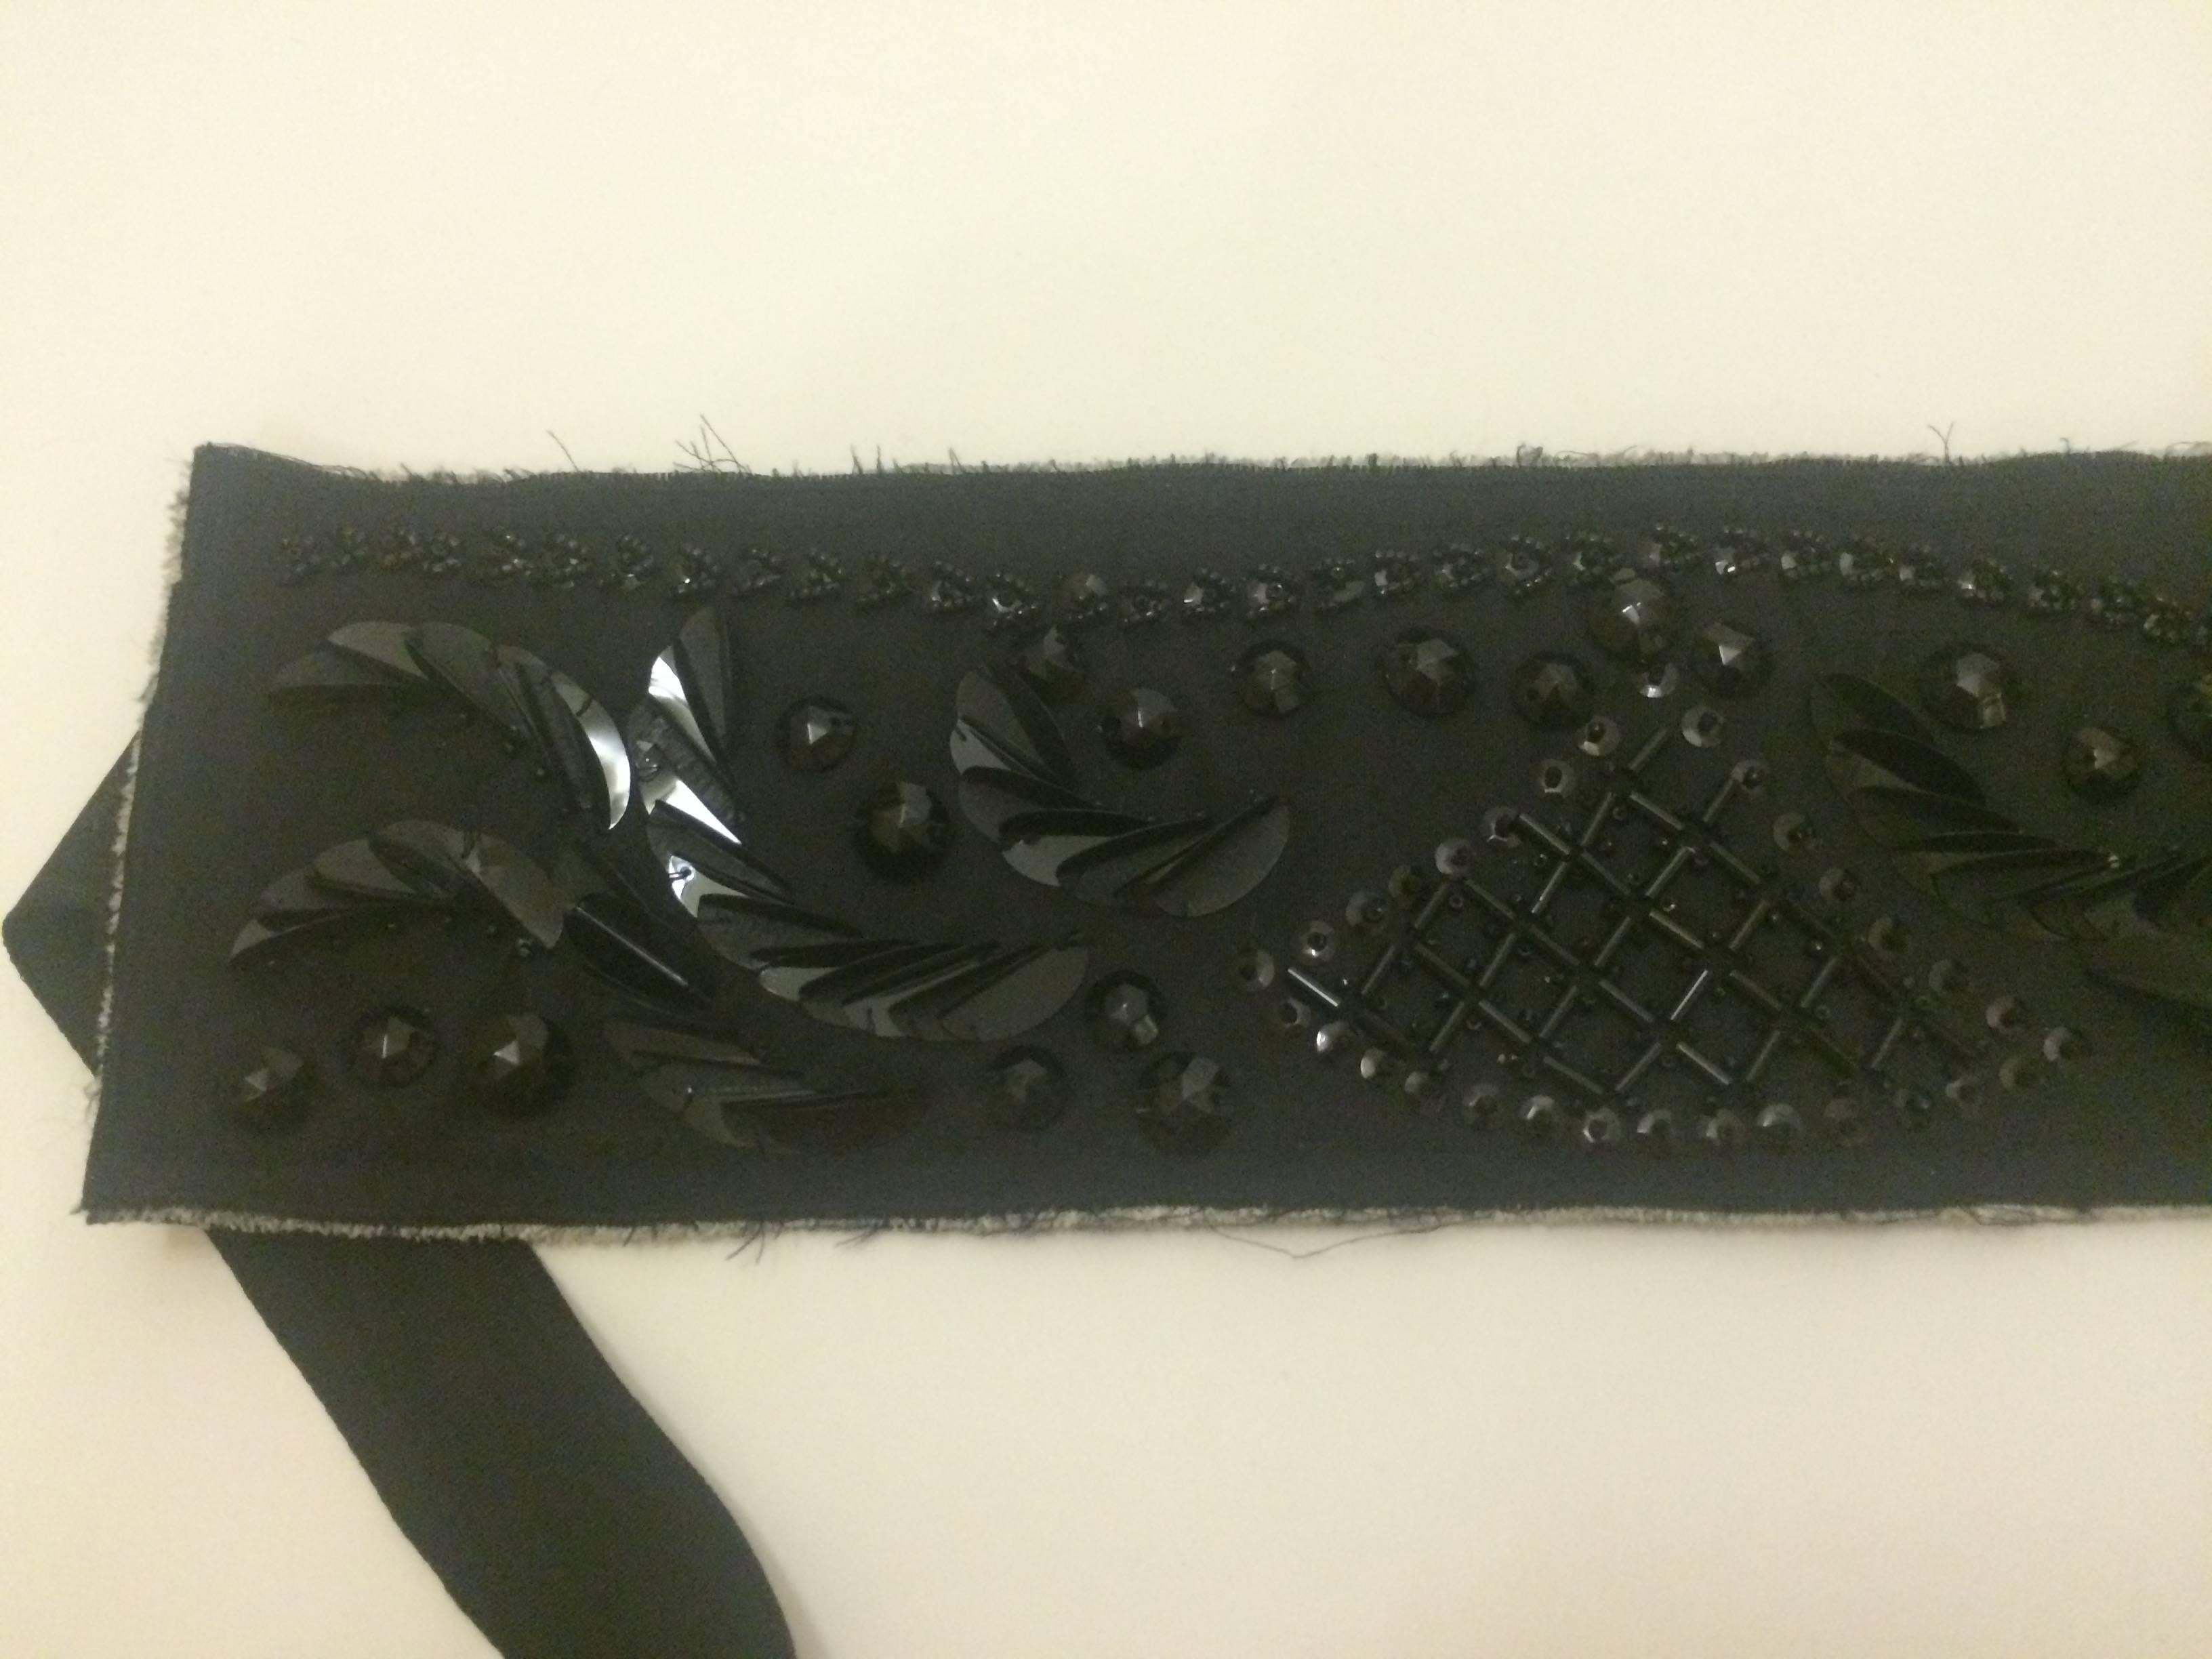 Prada black cloth belt embellished by beadwork. Raw edges with bits of the cream interior exposed. Black moire grosgrain ribbon closure.

Made in Italy. 

One size fits all.
Panel measures 19 1/4